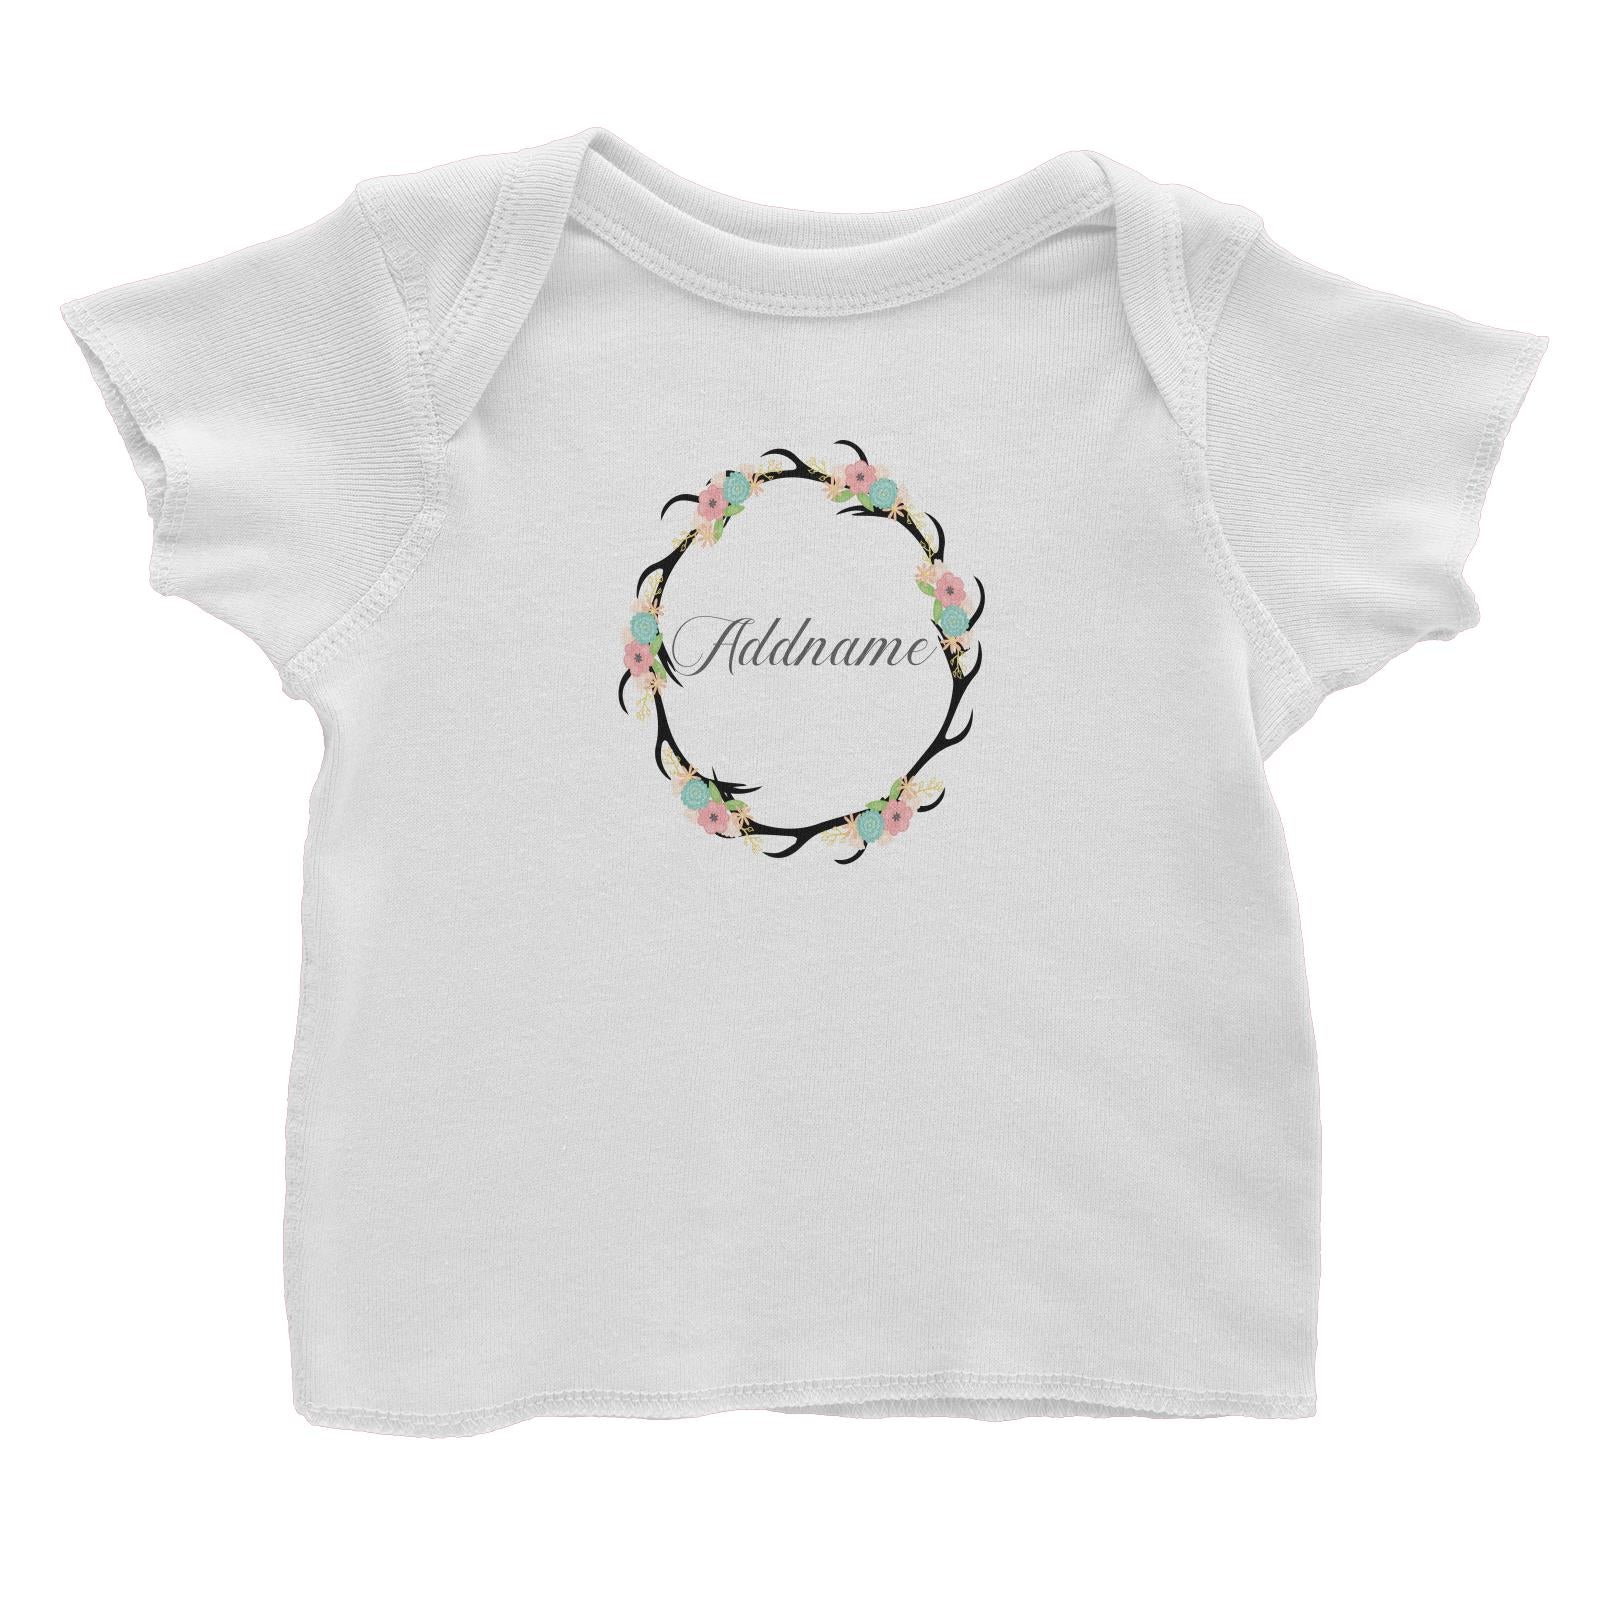 Basic Family Series Pastel Deer Flower And Antlers Wreath Addname Baby T-Shirt